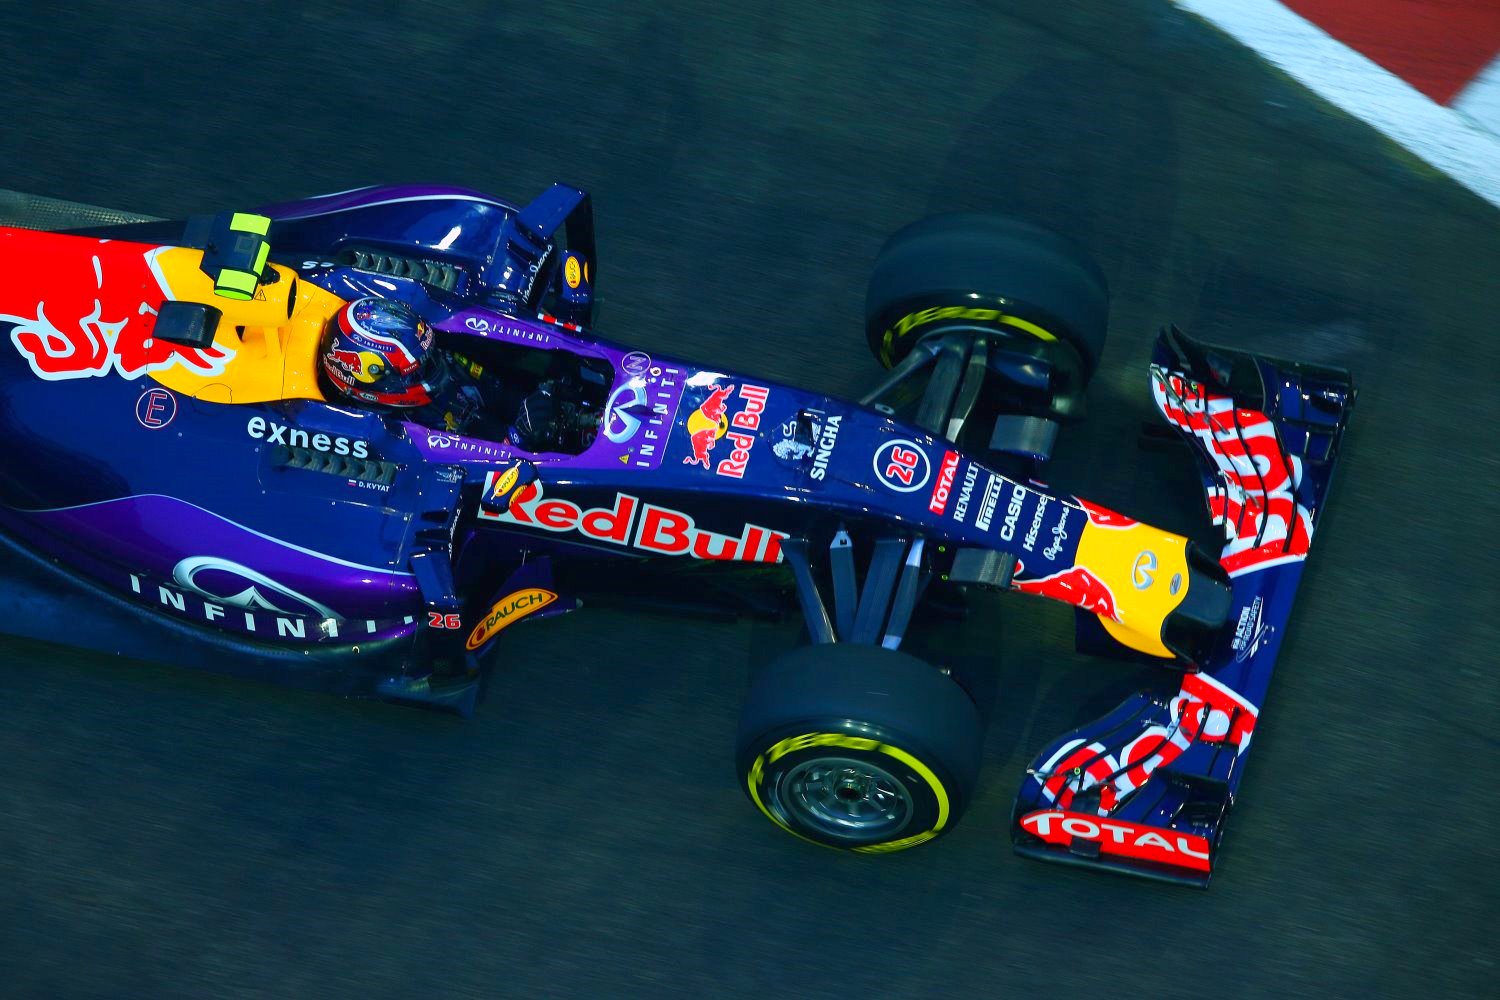 It will probably be Renault power for the two Red Bull teams in 2016